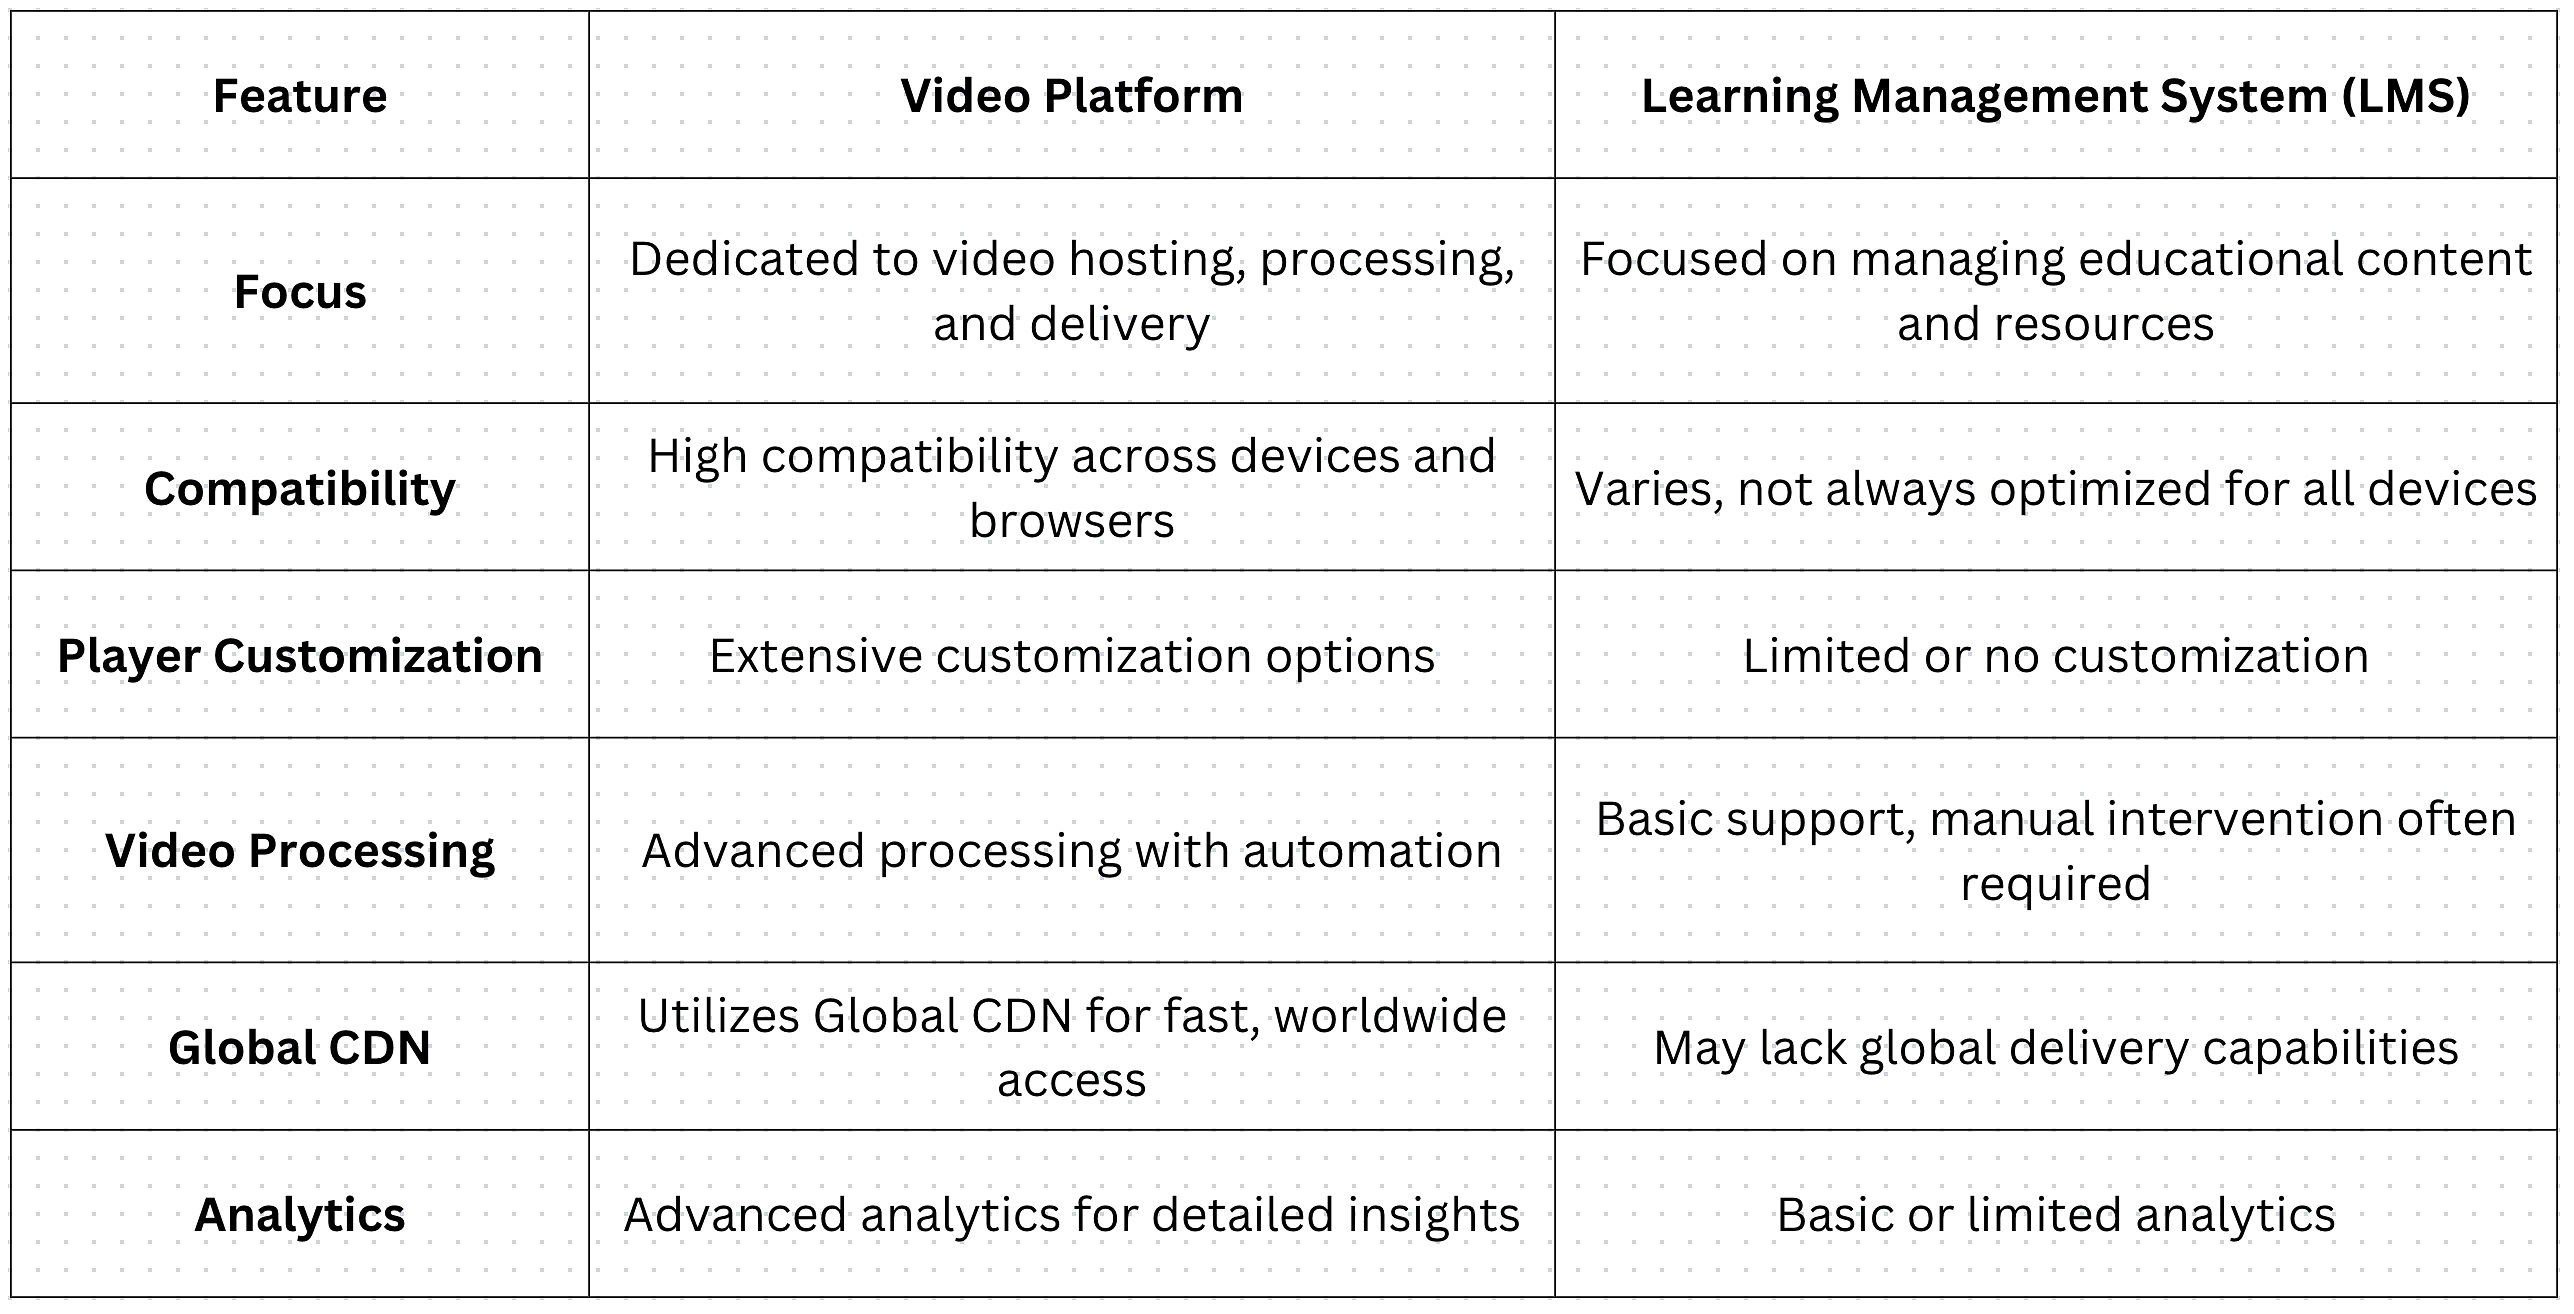 Difference between Video Platforms and LMS